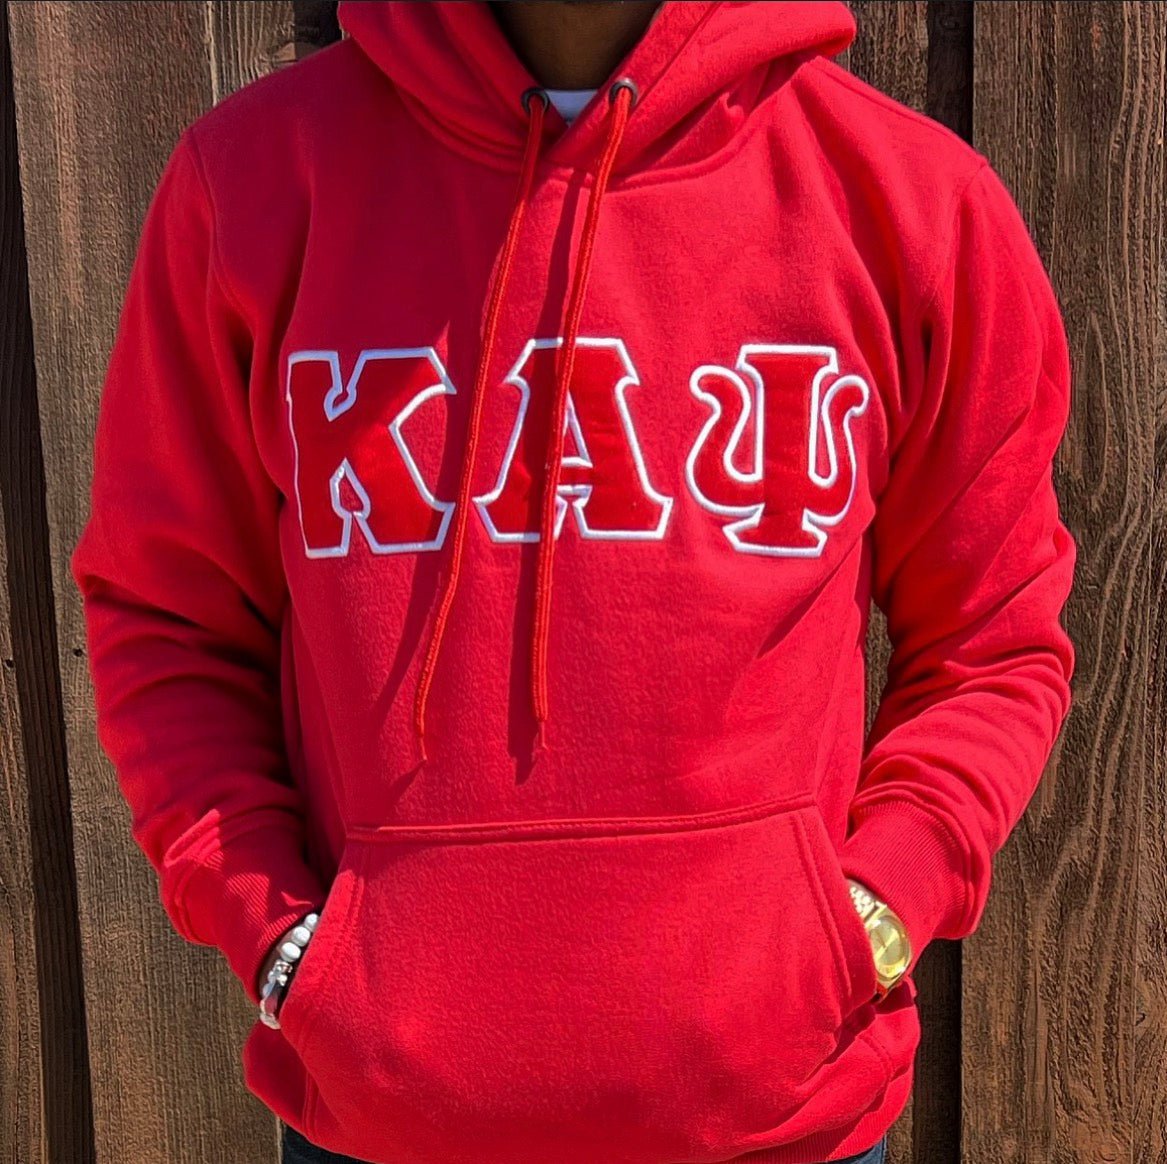 Licht Hymne Edele Kappa Alpha Psi Embroidery Hoodie - Red / Wht – Nupekave